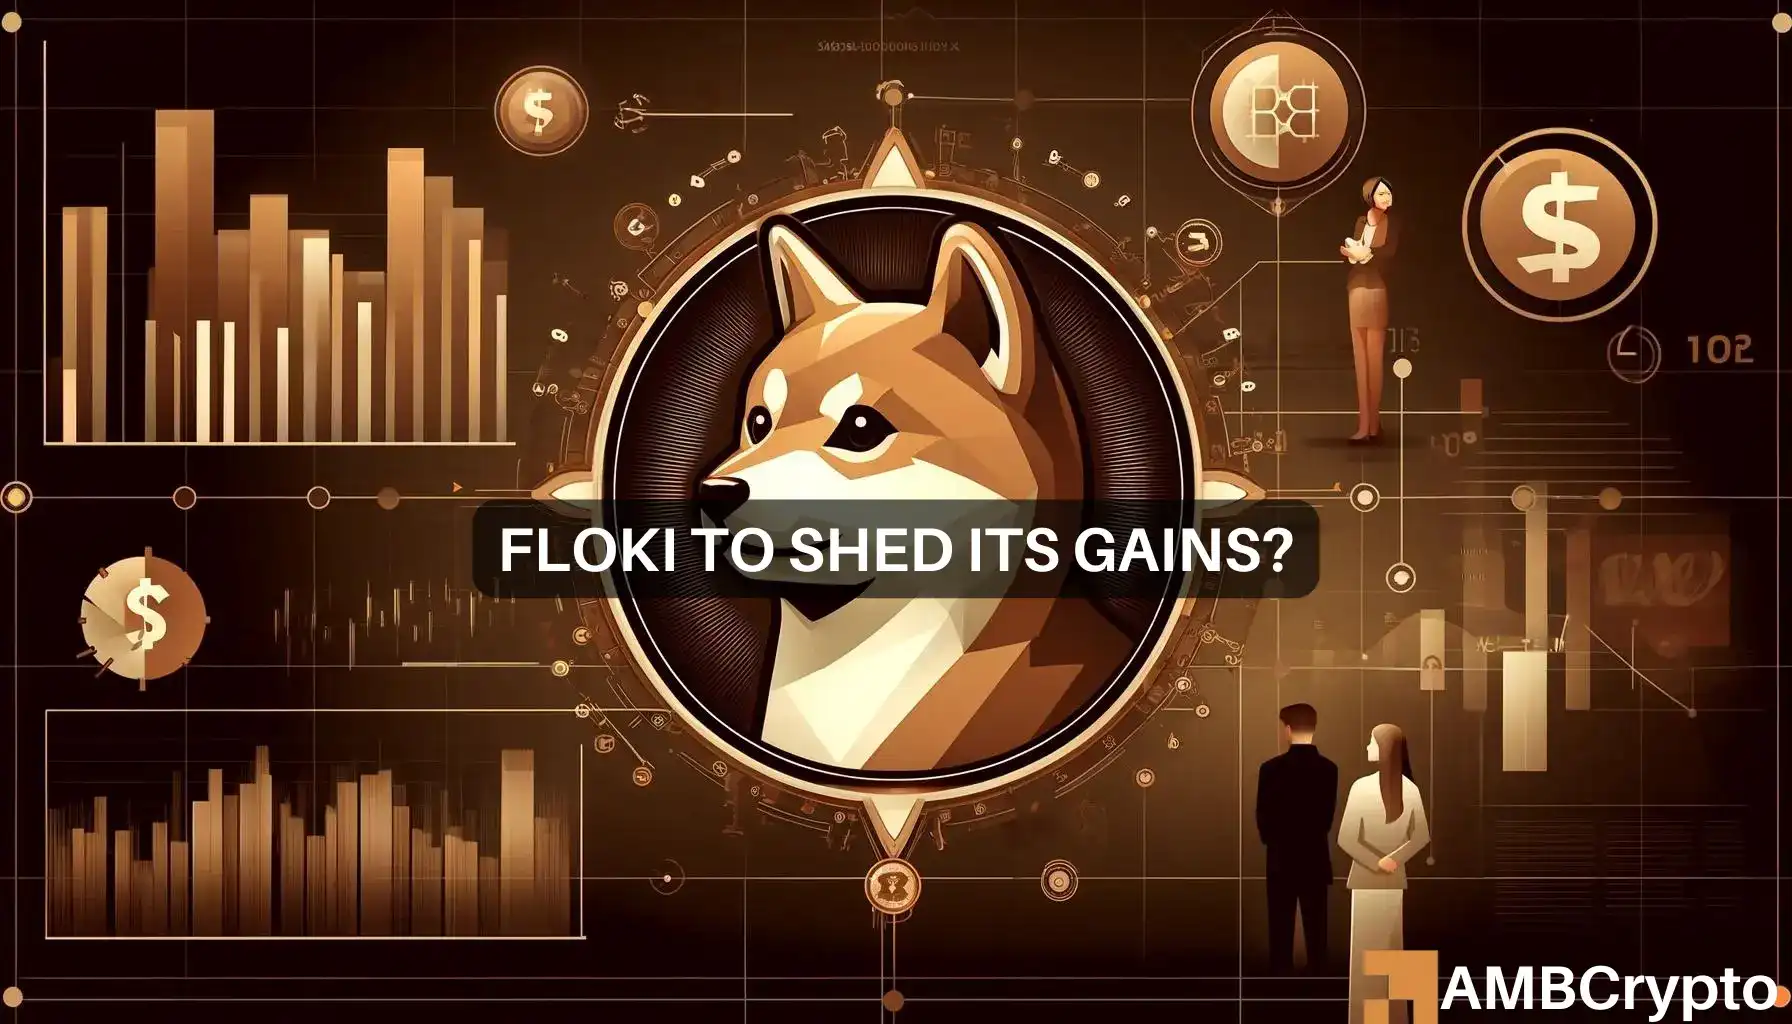 Floki: After 80% gains, is the memecoin’s bull run about to end?